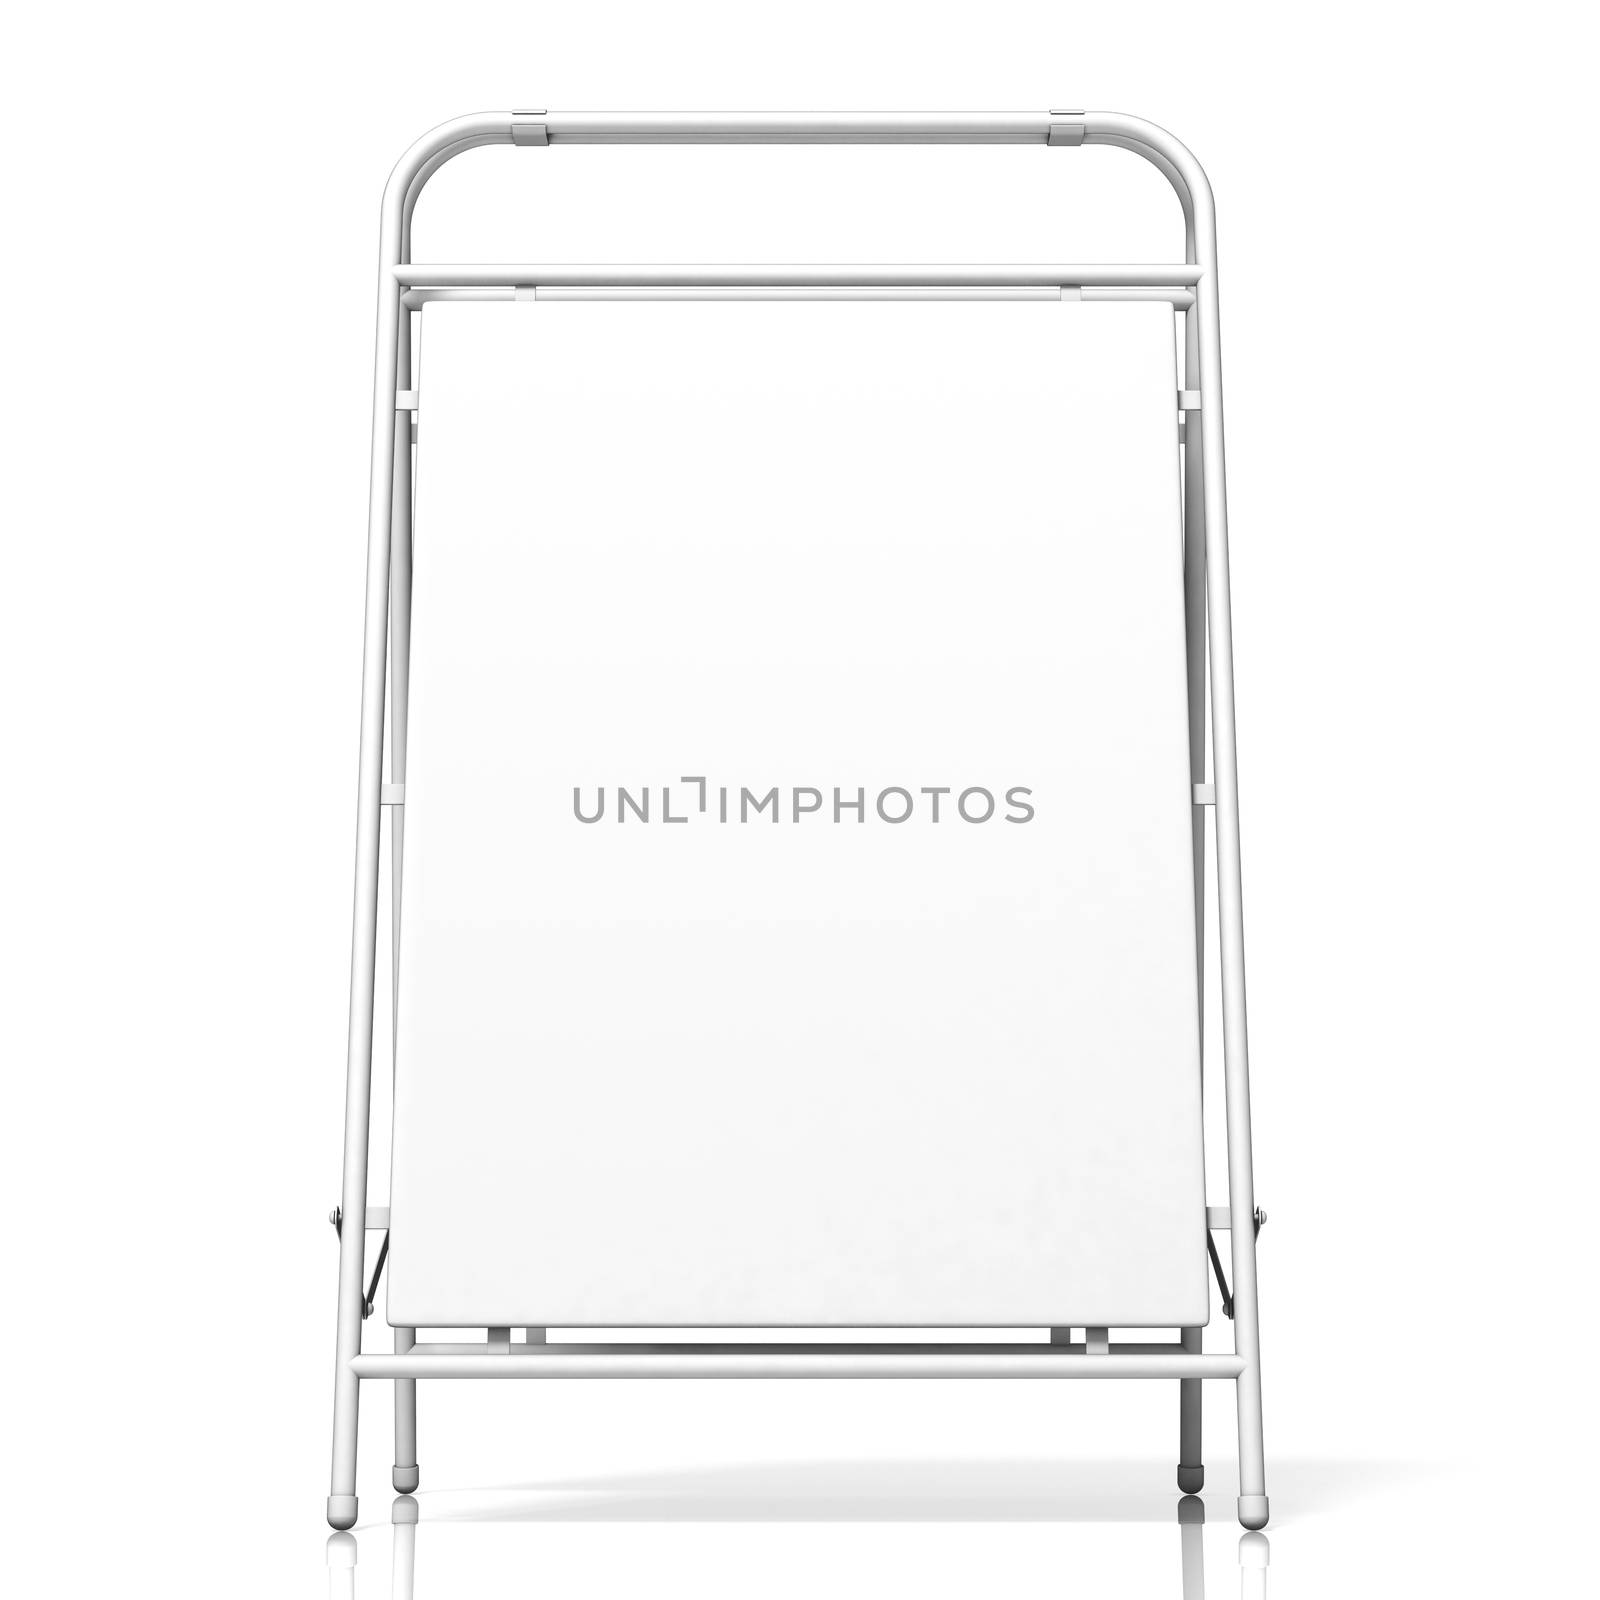 Metal advertising stand, with copy space board. Front view. 3D illustration isolated on white background